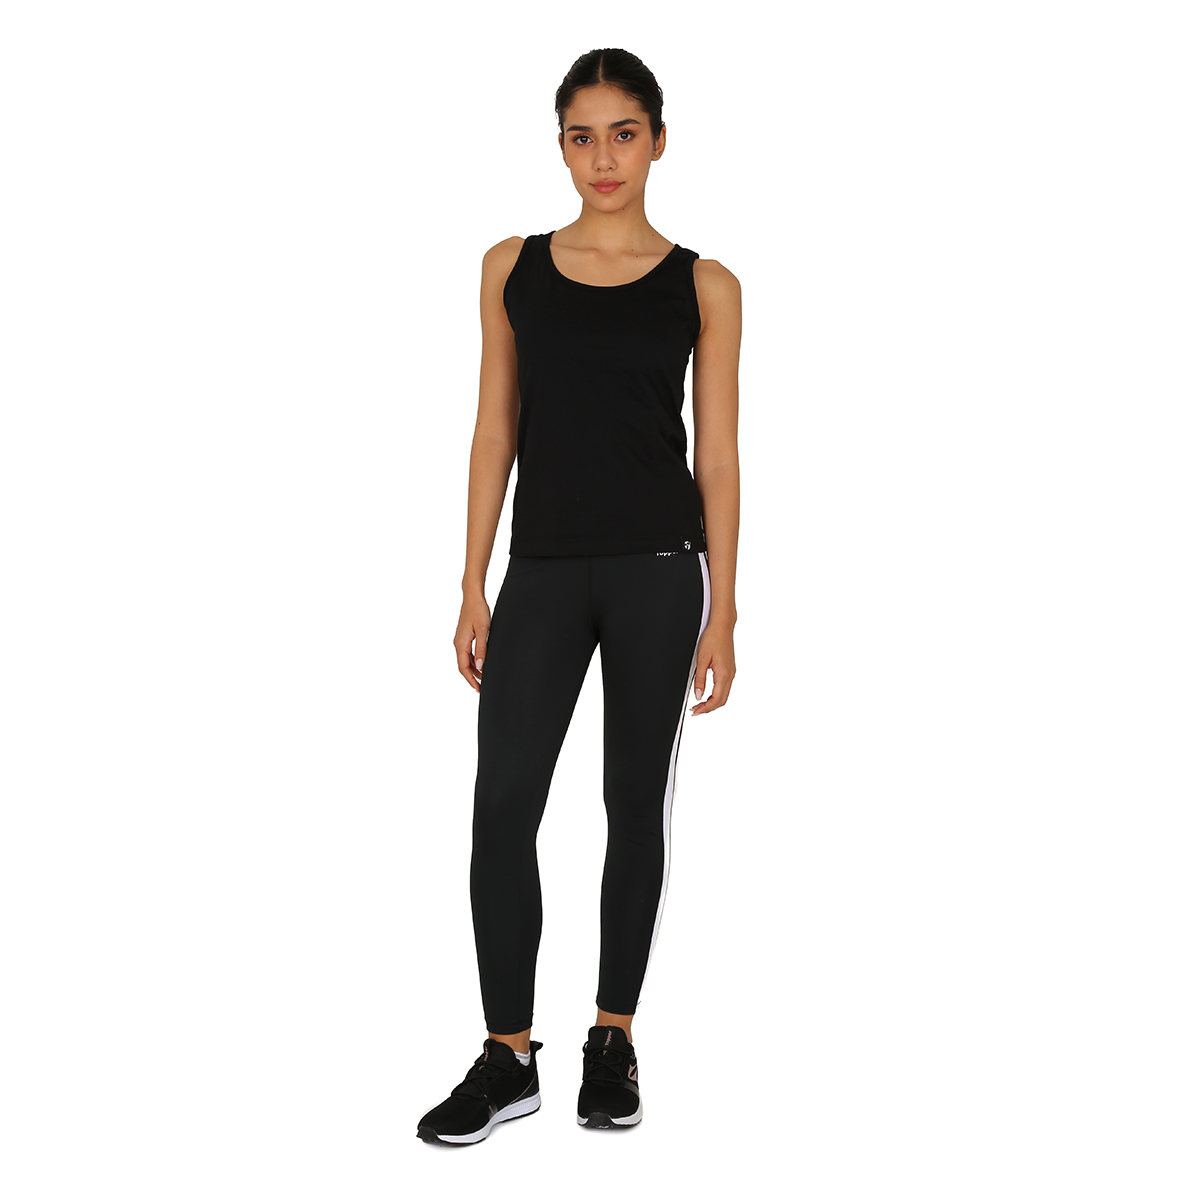 Musculosa Topper Básica,  image number null